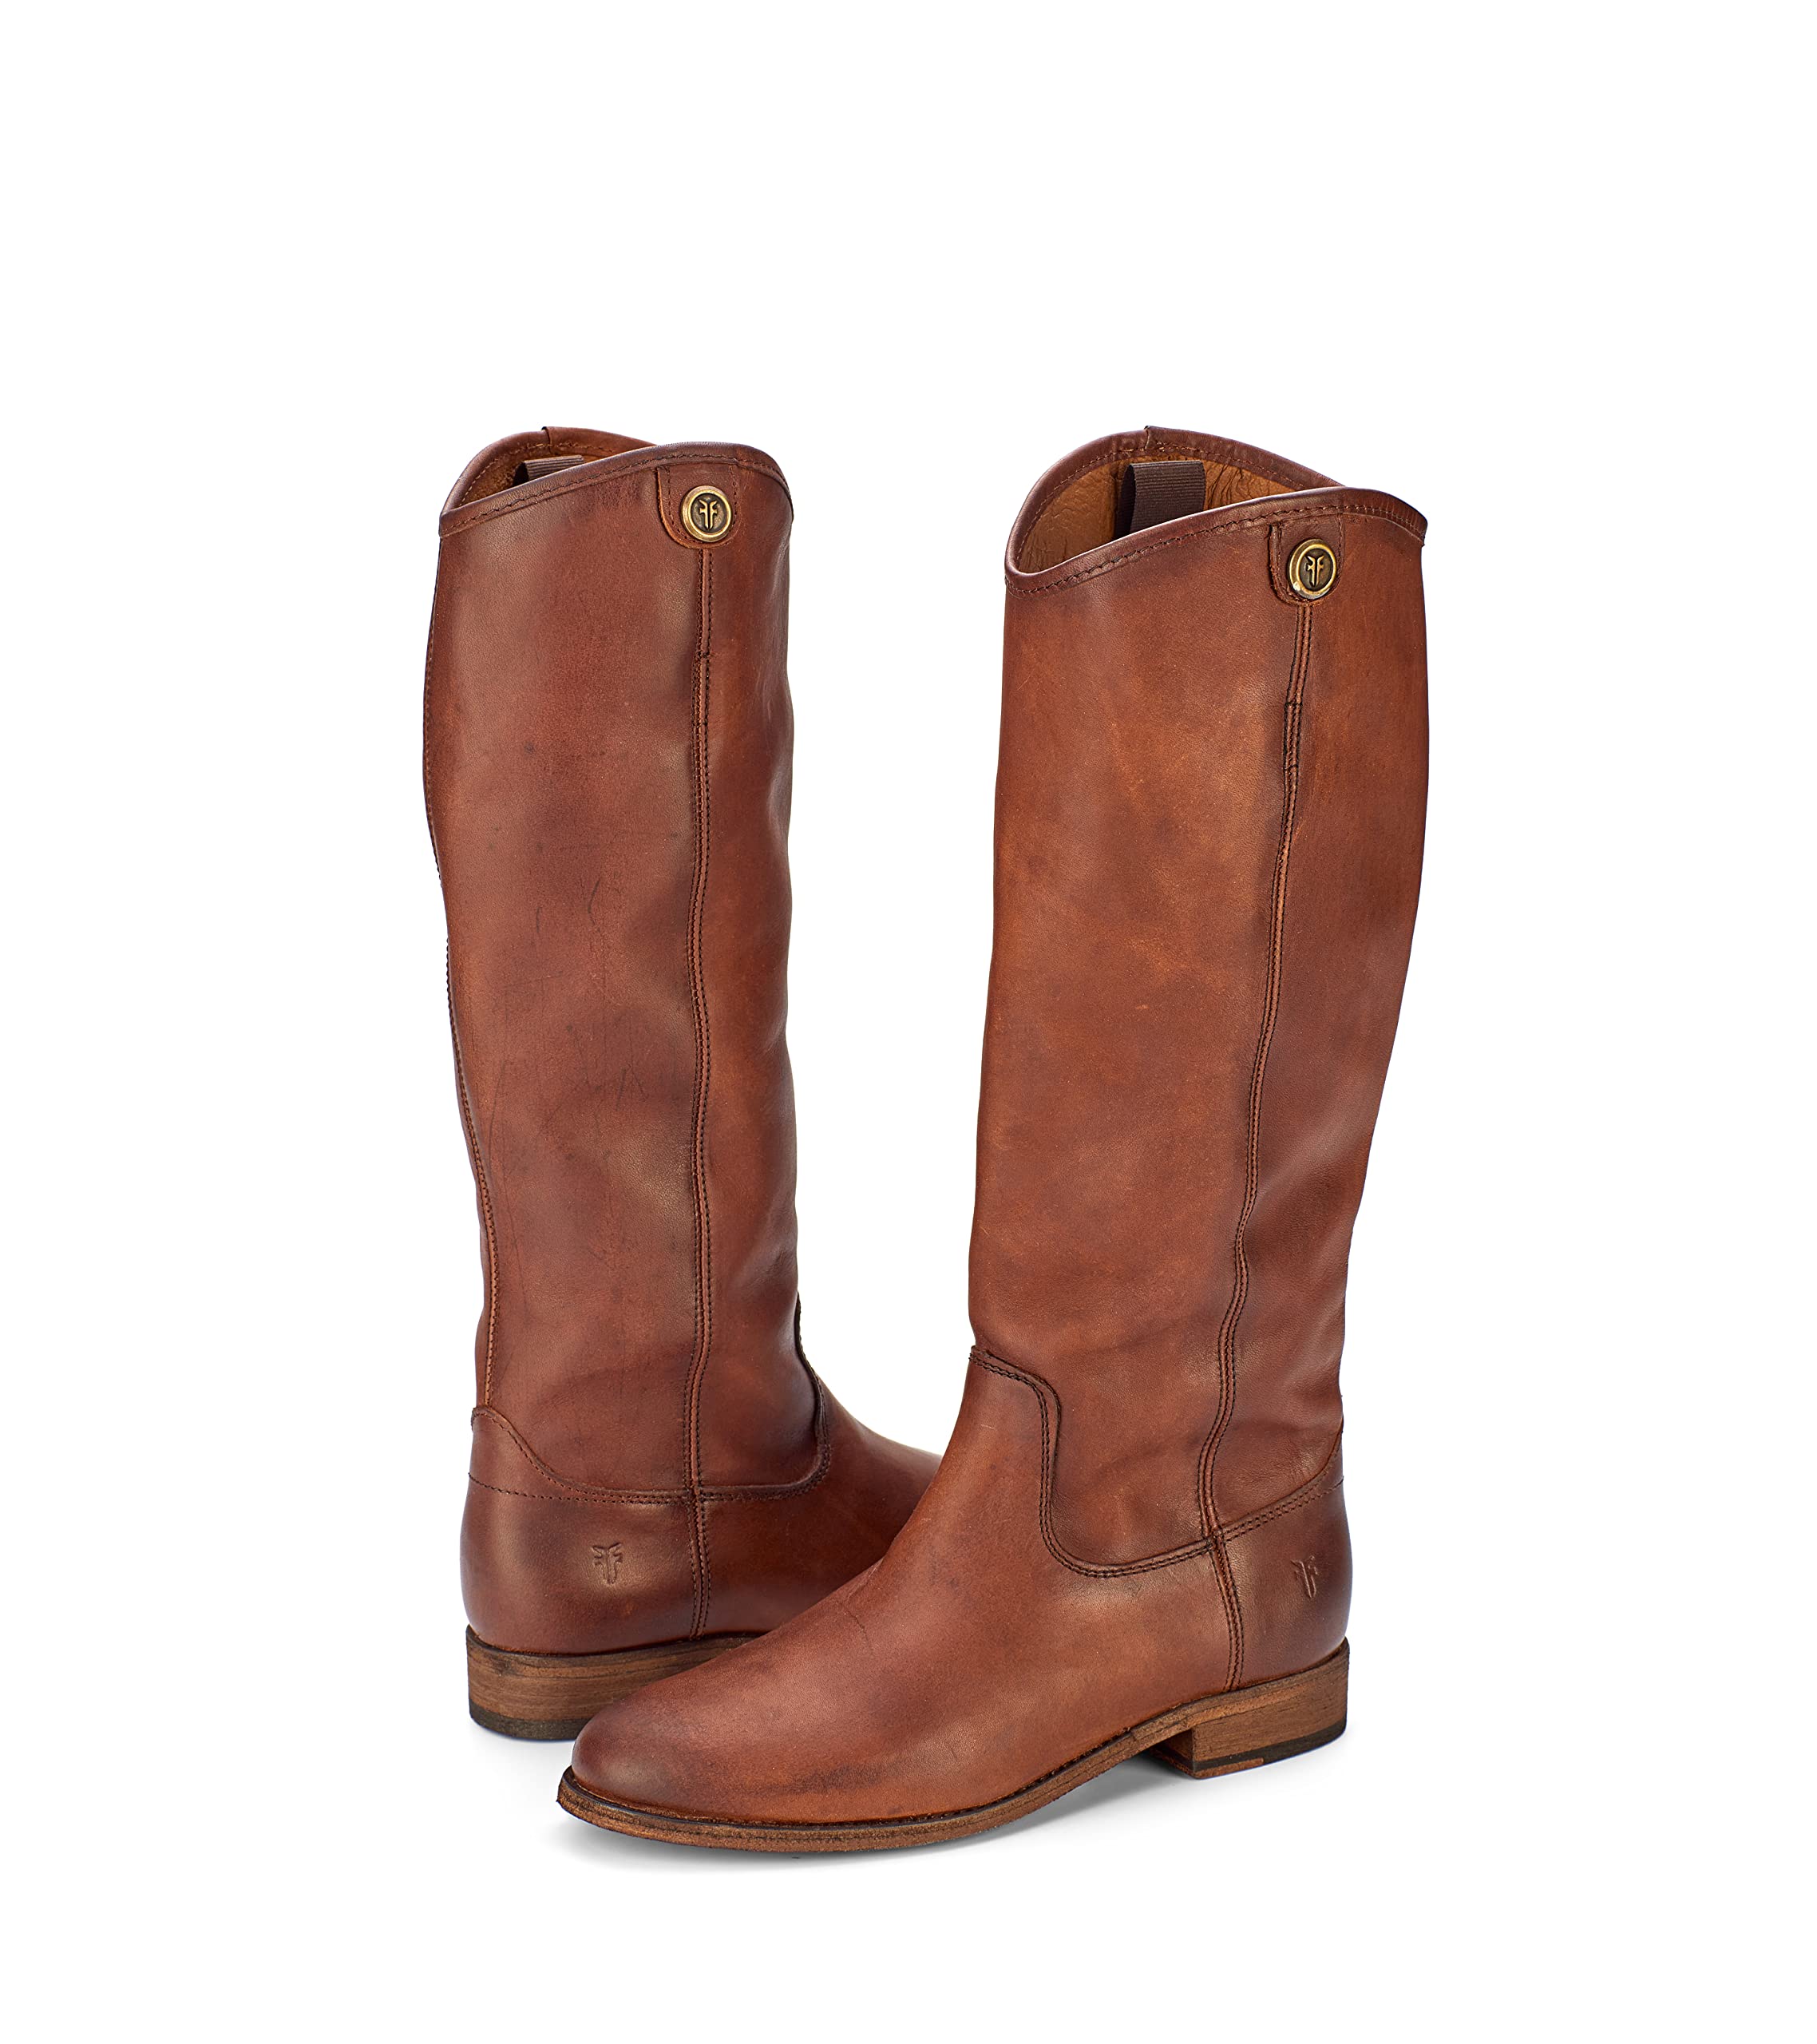 Frye Melissa Button 2 Equestrian-Inspired Tall Boots for Women Made from Hard-Wearing Vintage Leather with Antique Metal Hardware and Leather Outsole – 15 ½” Shaft Height